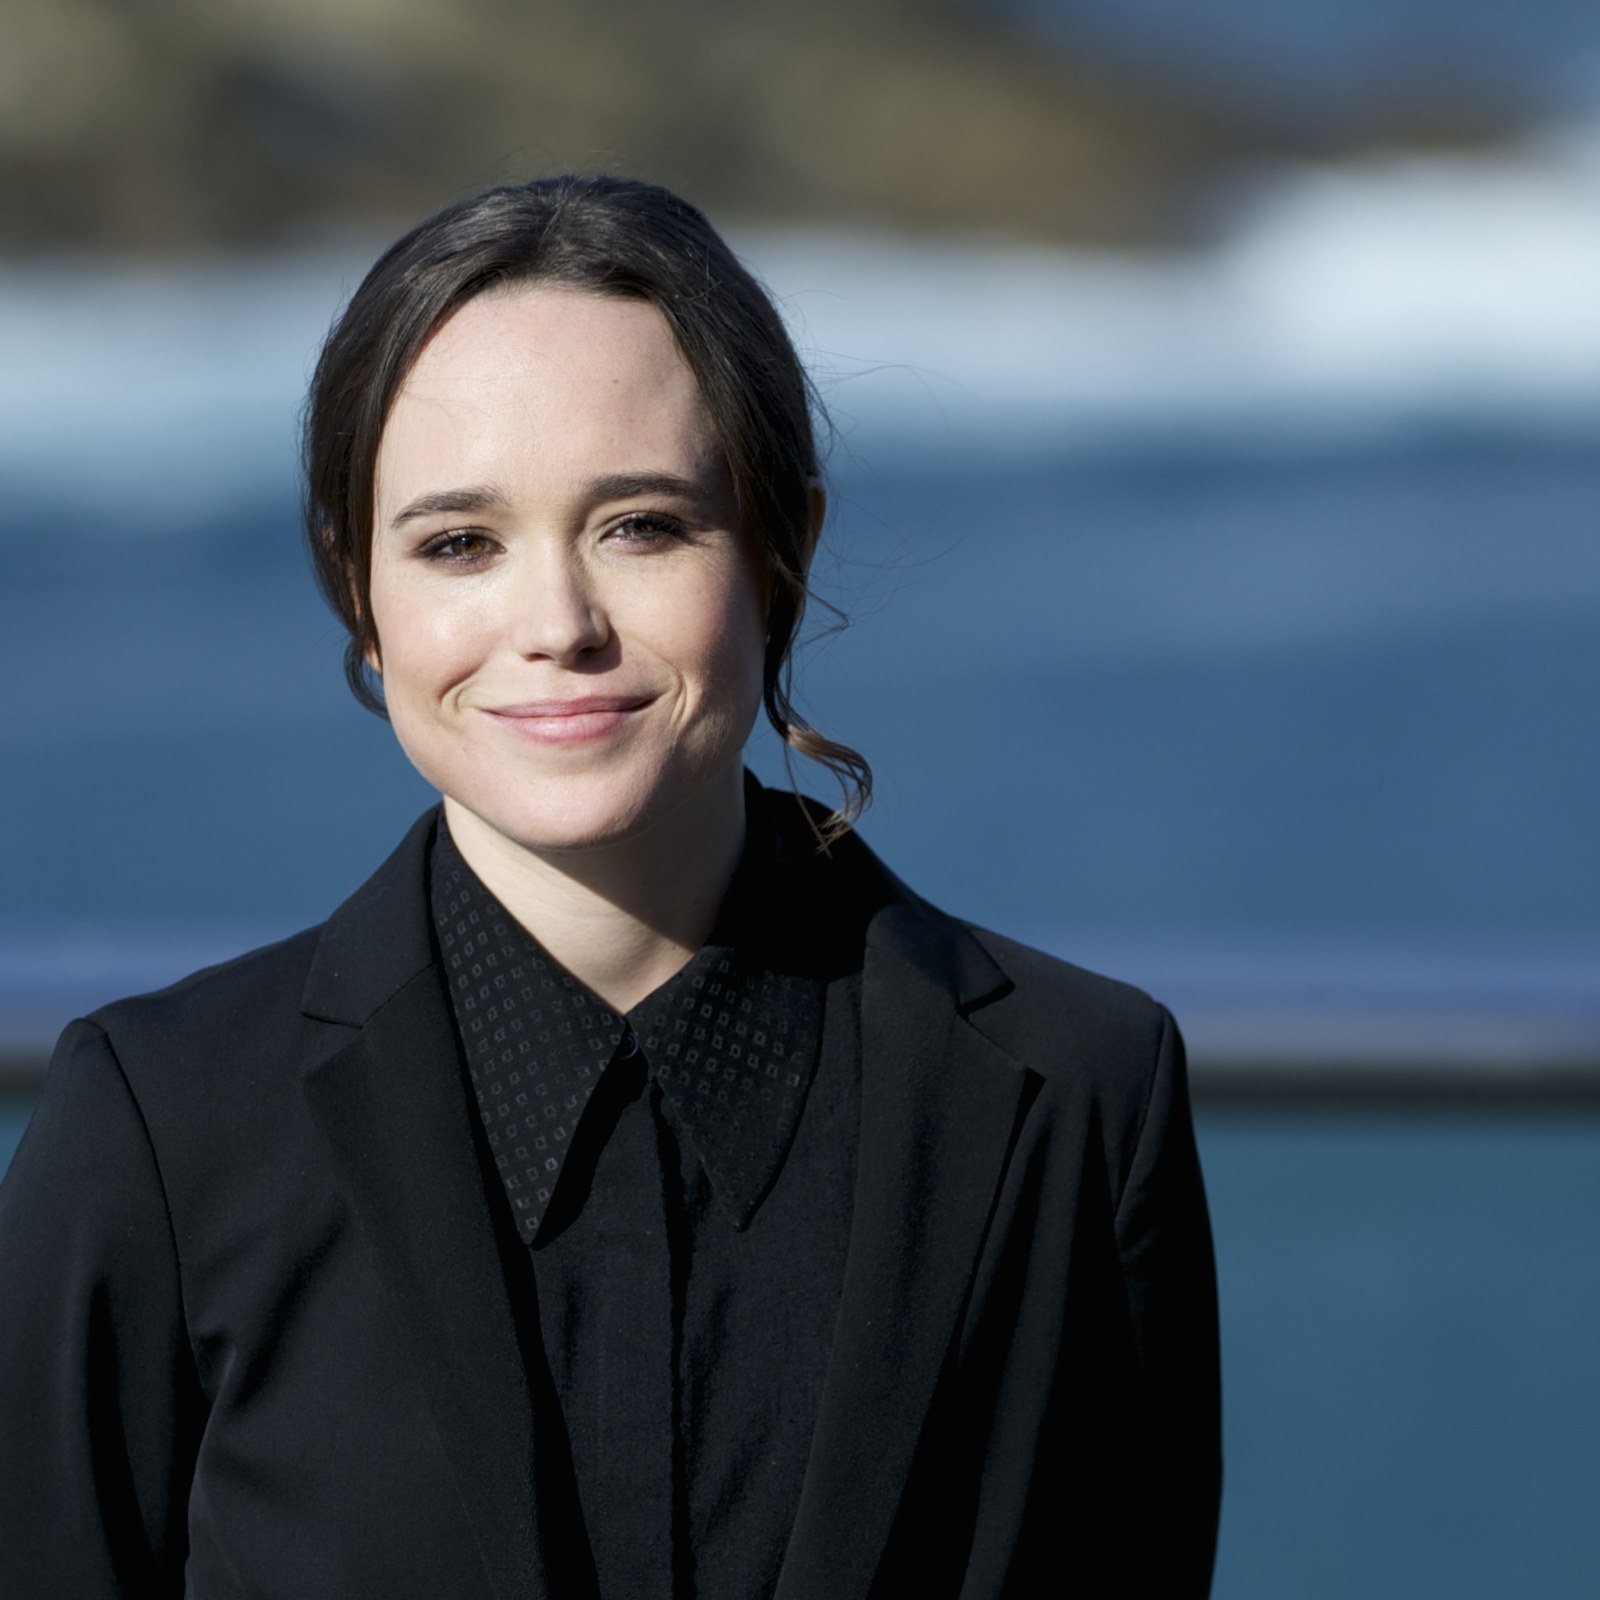 Ellen Page Is Now Elliot Page as Actor Shares Transgender Identity